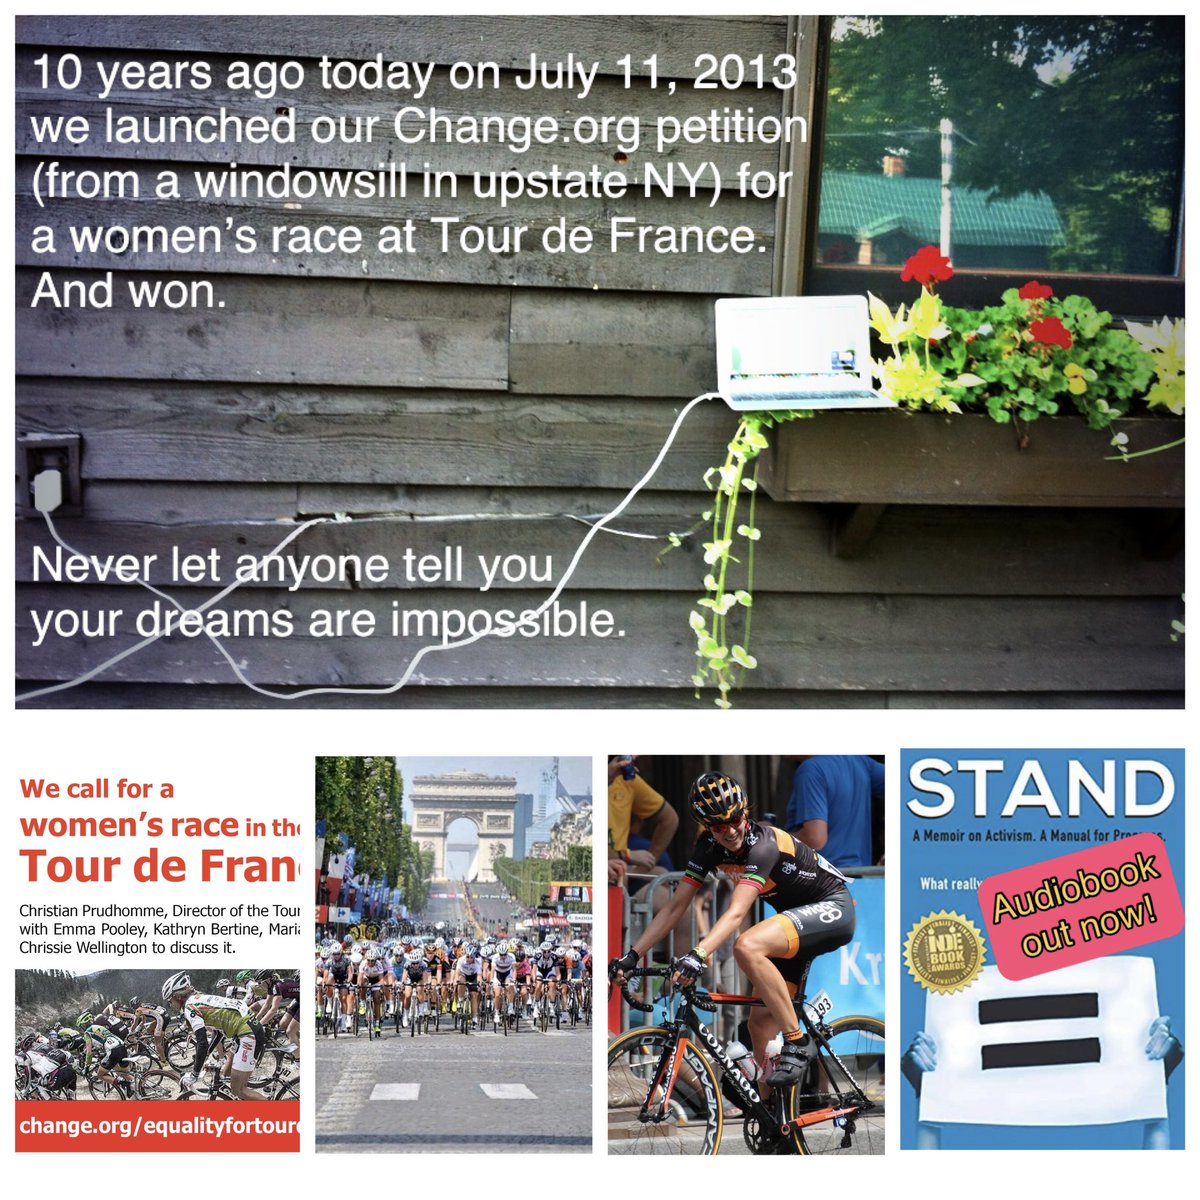 Today’s a meaningful one. 10y anniversary of @LeTourEntier @PooleyEmma @marianne_vos @chrissiesmiles & I launching our @Change petition for women to race @LeTour de France. We won. Toughest decade of my life. Wouldn’t change a thing. Struggle was worth it. Learned so much. Like…